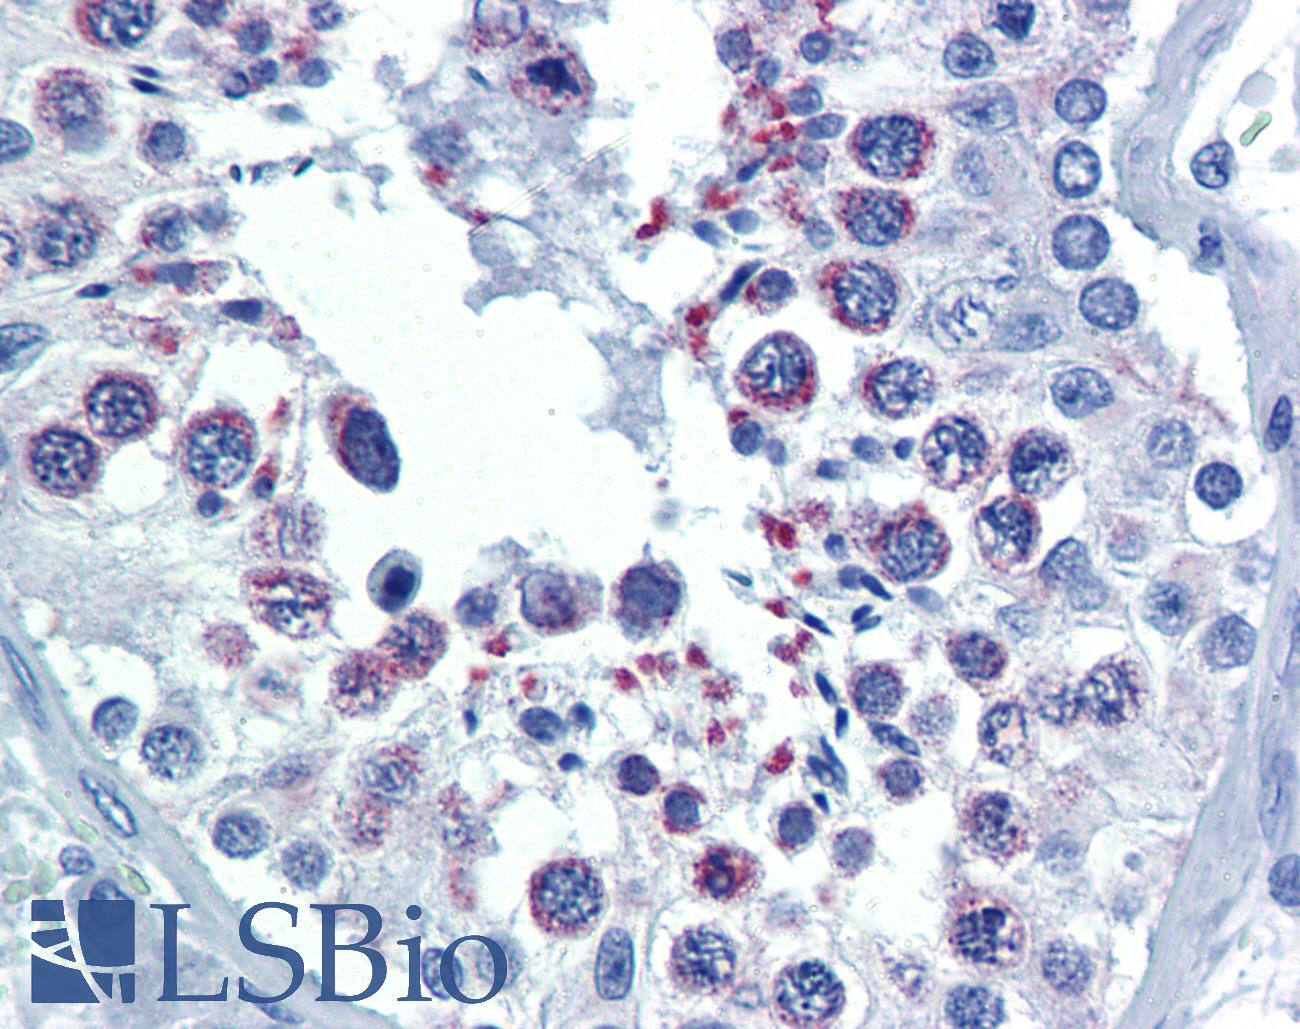 DIABLO / SMAC Antibody - Anti-DIABLO / SMAC antibody IHC of human testis. Immunohistochemistry of formalin-fixed, paraffin-embedded tissue after heat-induced antigen retrieval. Antibody concentration 10 ug/ml.